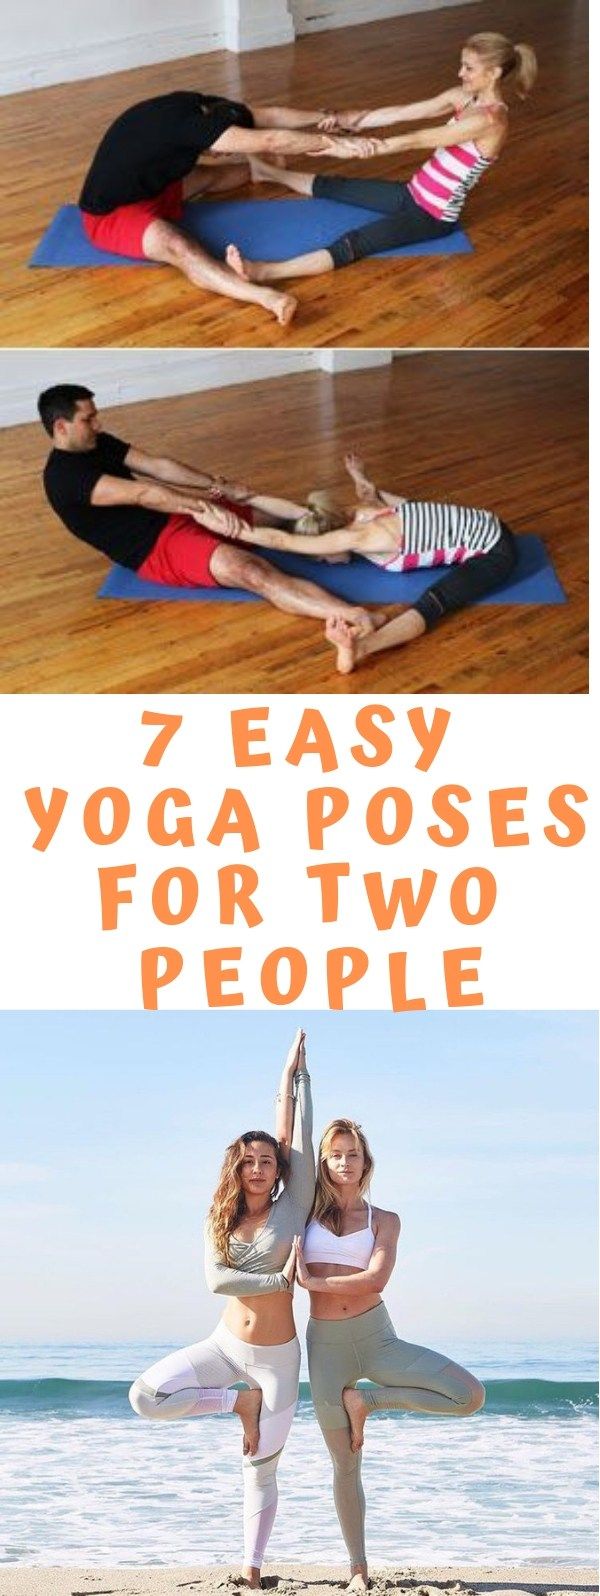 7 Easy Yoga Poses For Two People